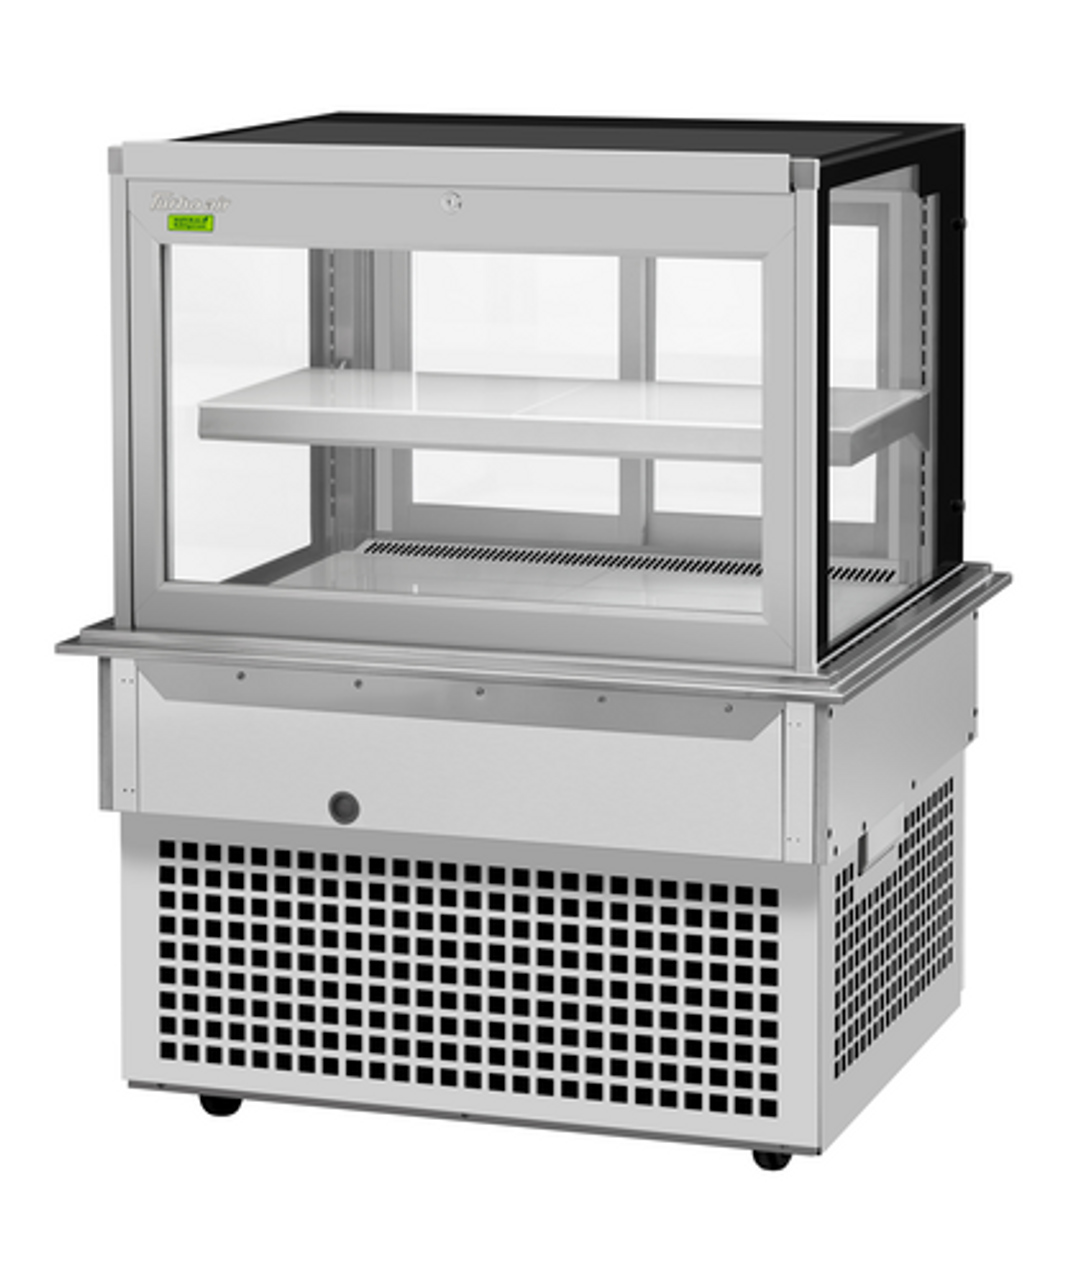 Turbo Air Bakery display case, Refrigerated TBP36-46FDN